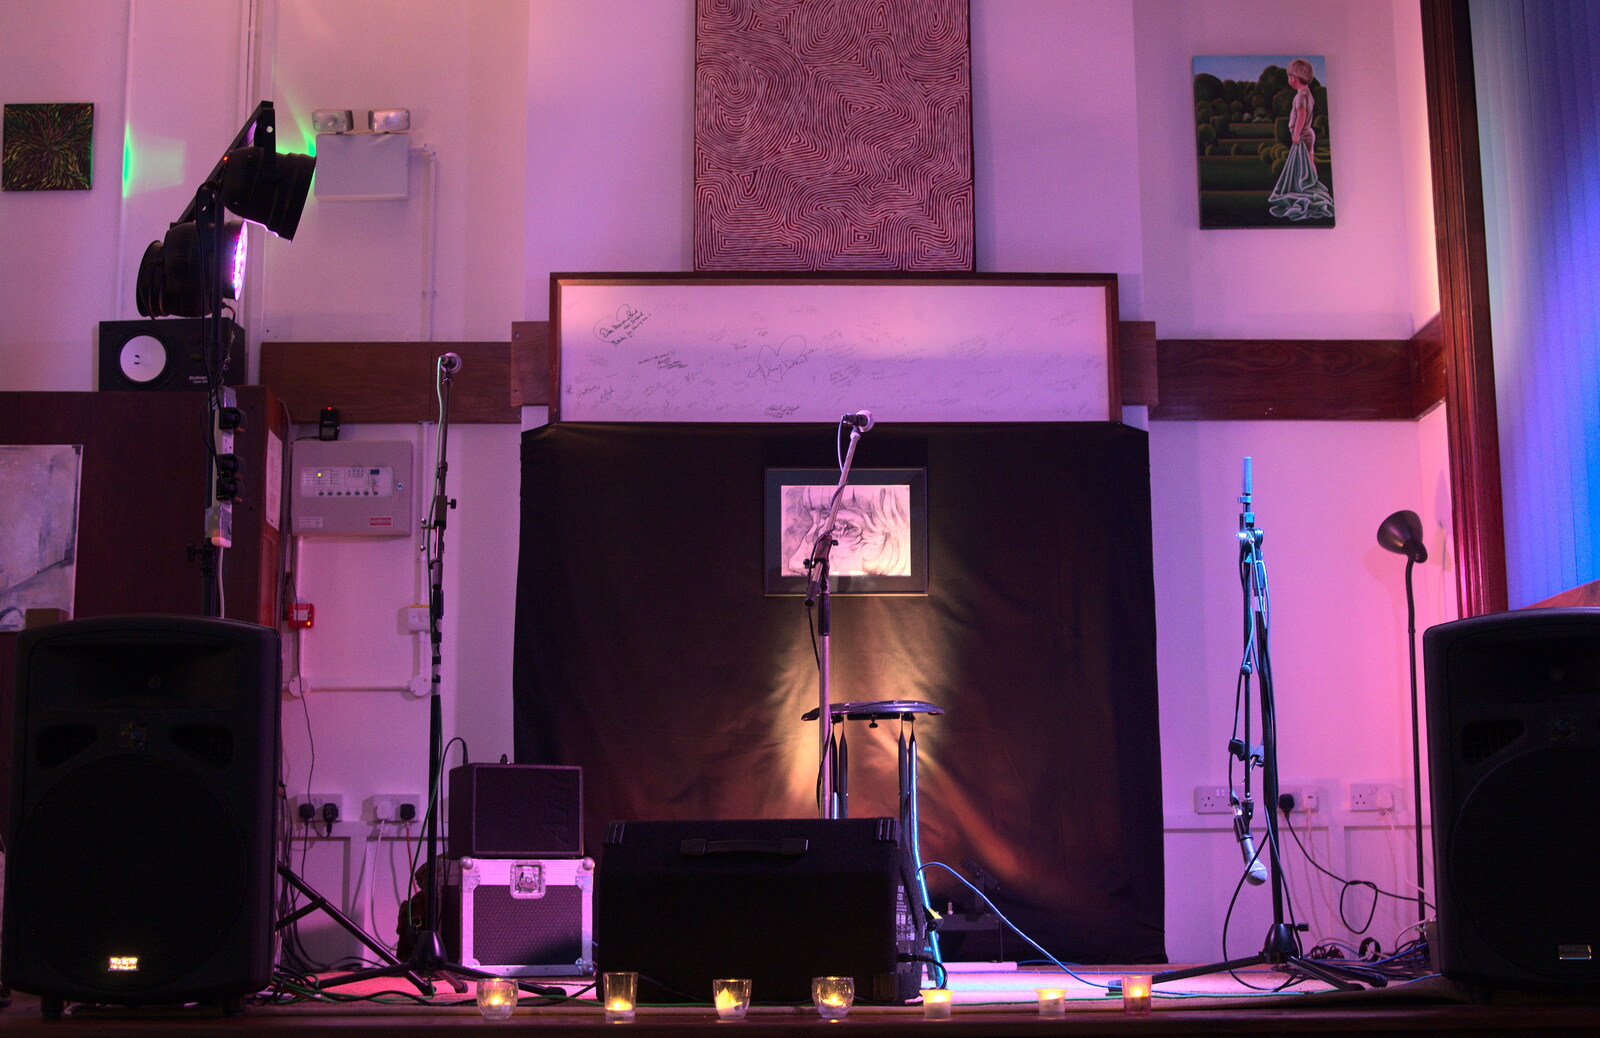 Up at The Bank, the stage is set from A Night at the Bank, and a Building Update, Brome and Eye, Suffolk - 7th February 2014